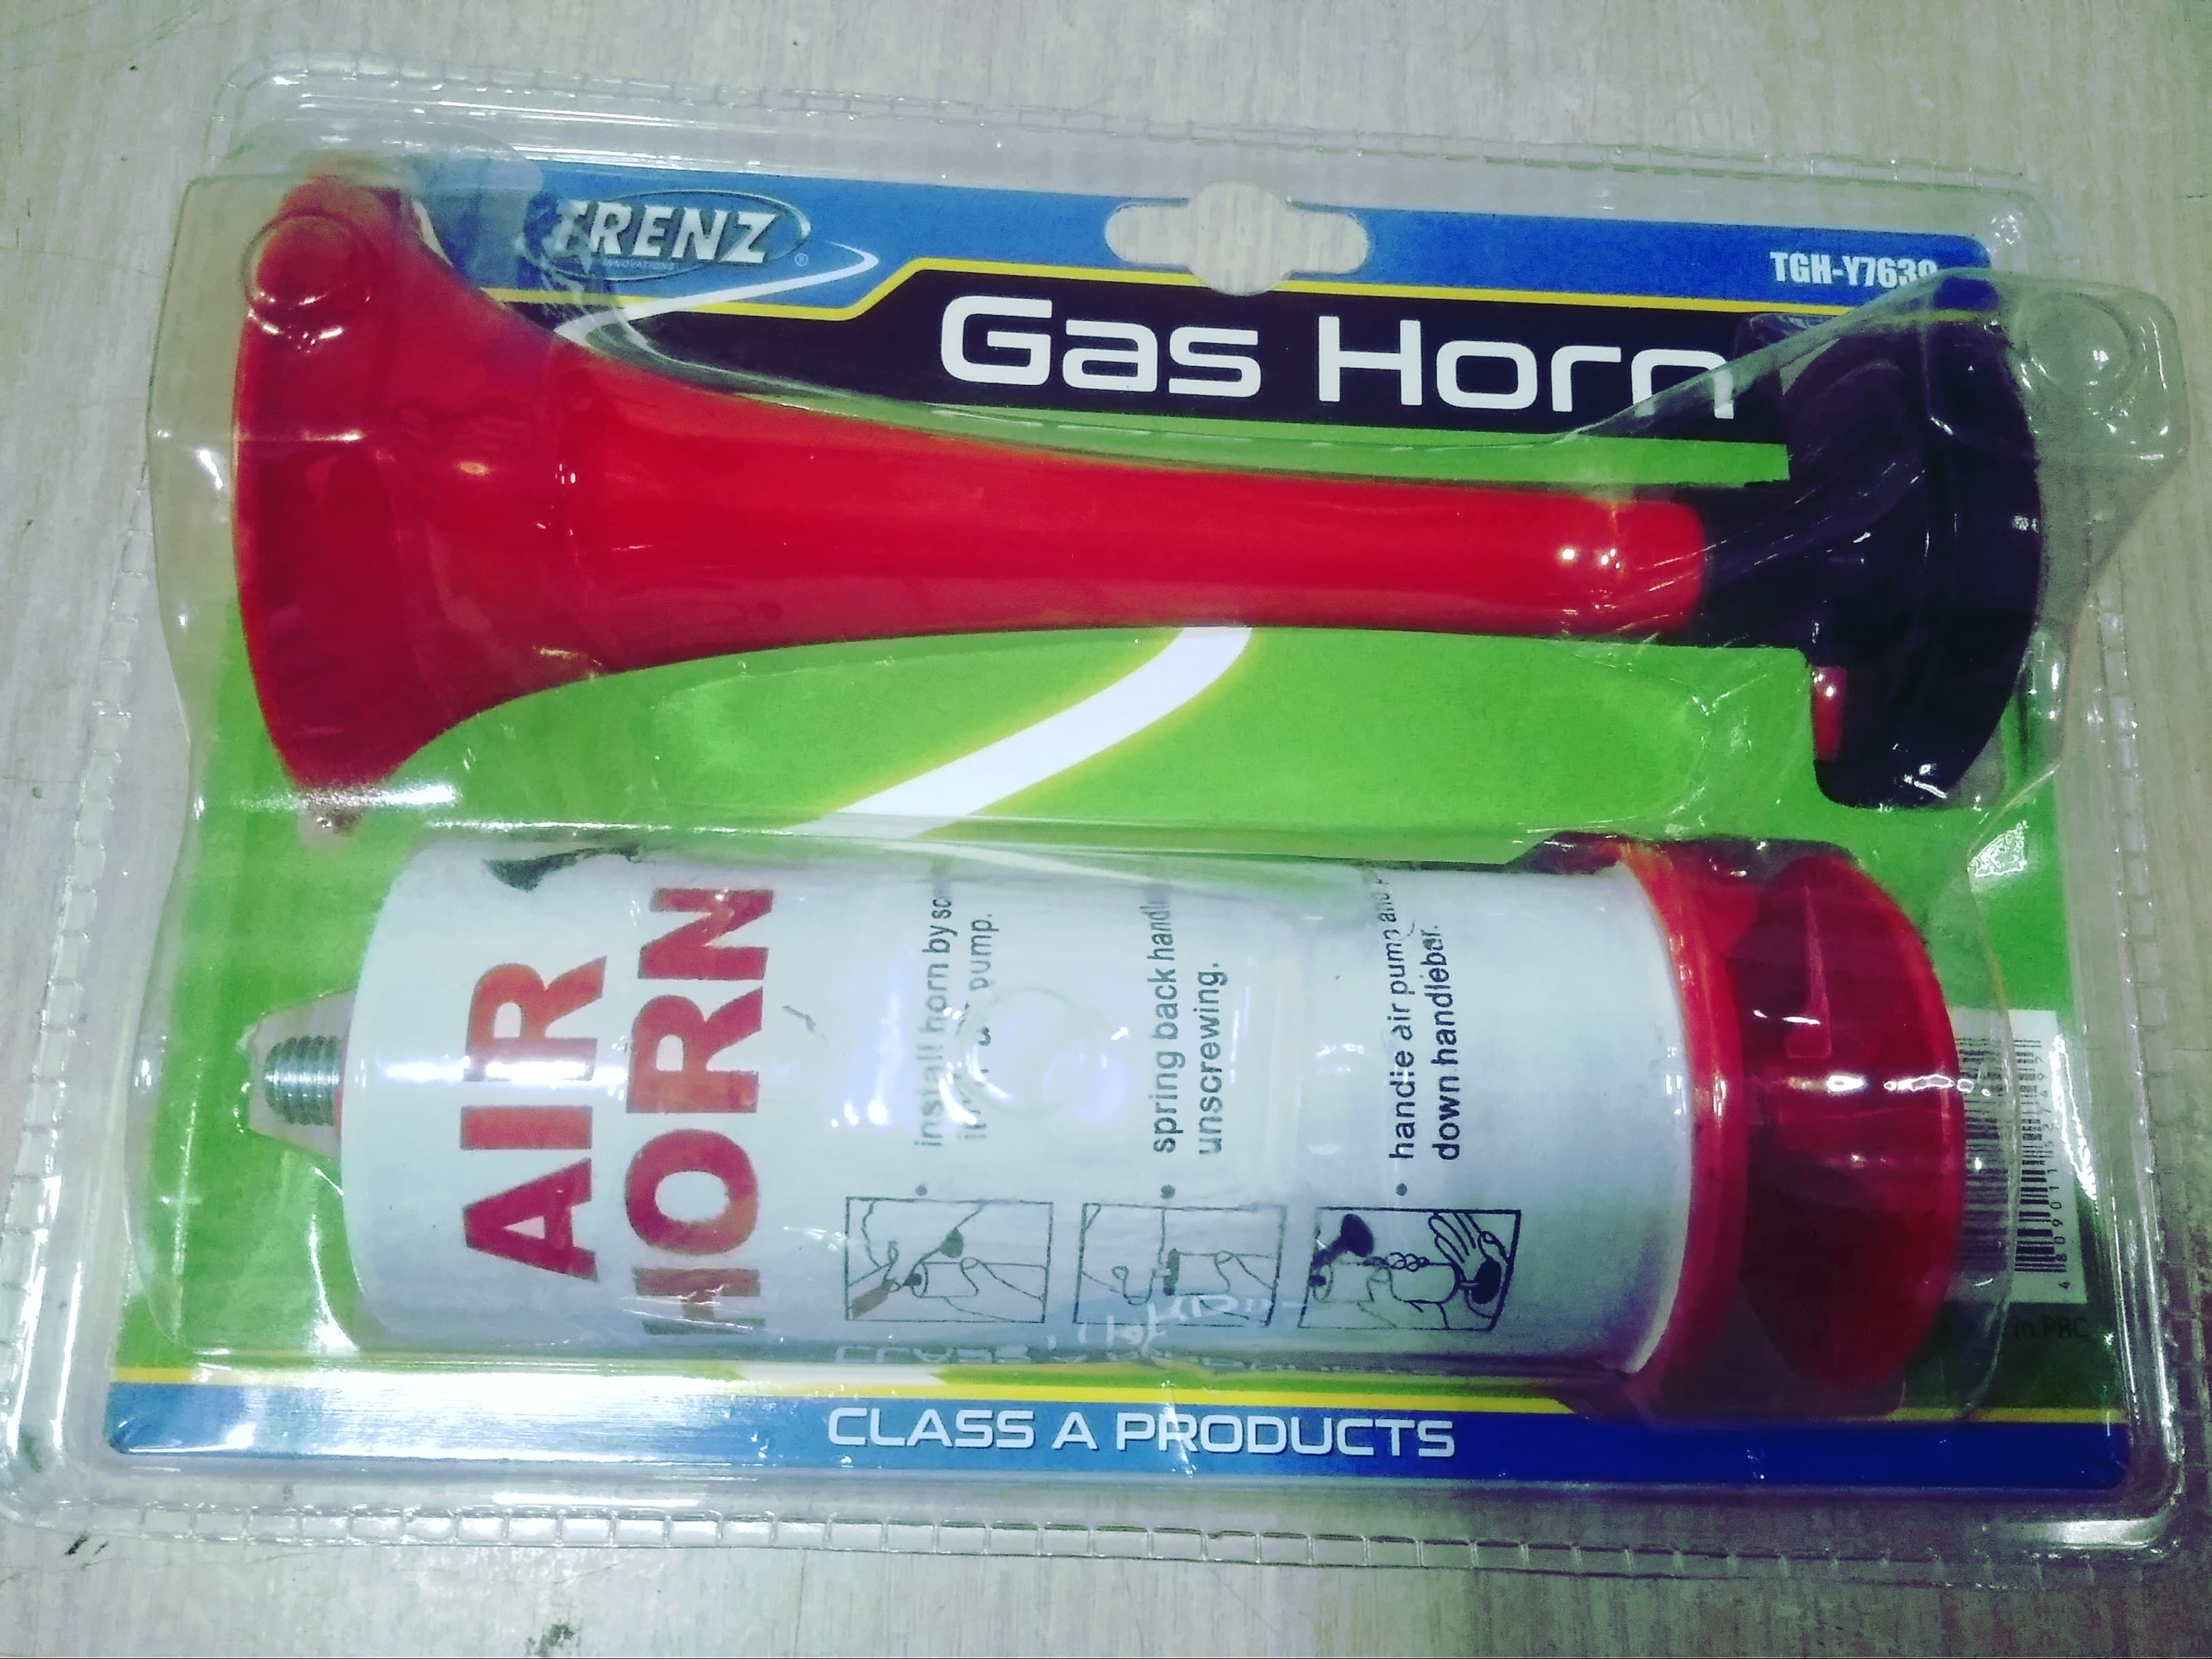 Trenz Gas Horn with red trumpet TGH-Y7639